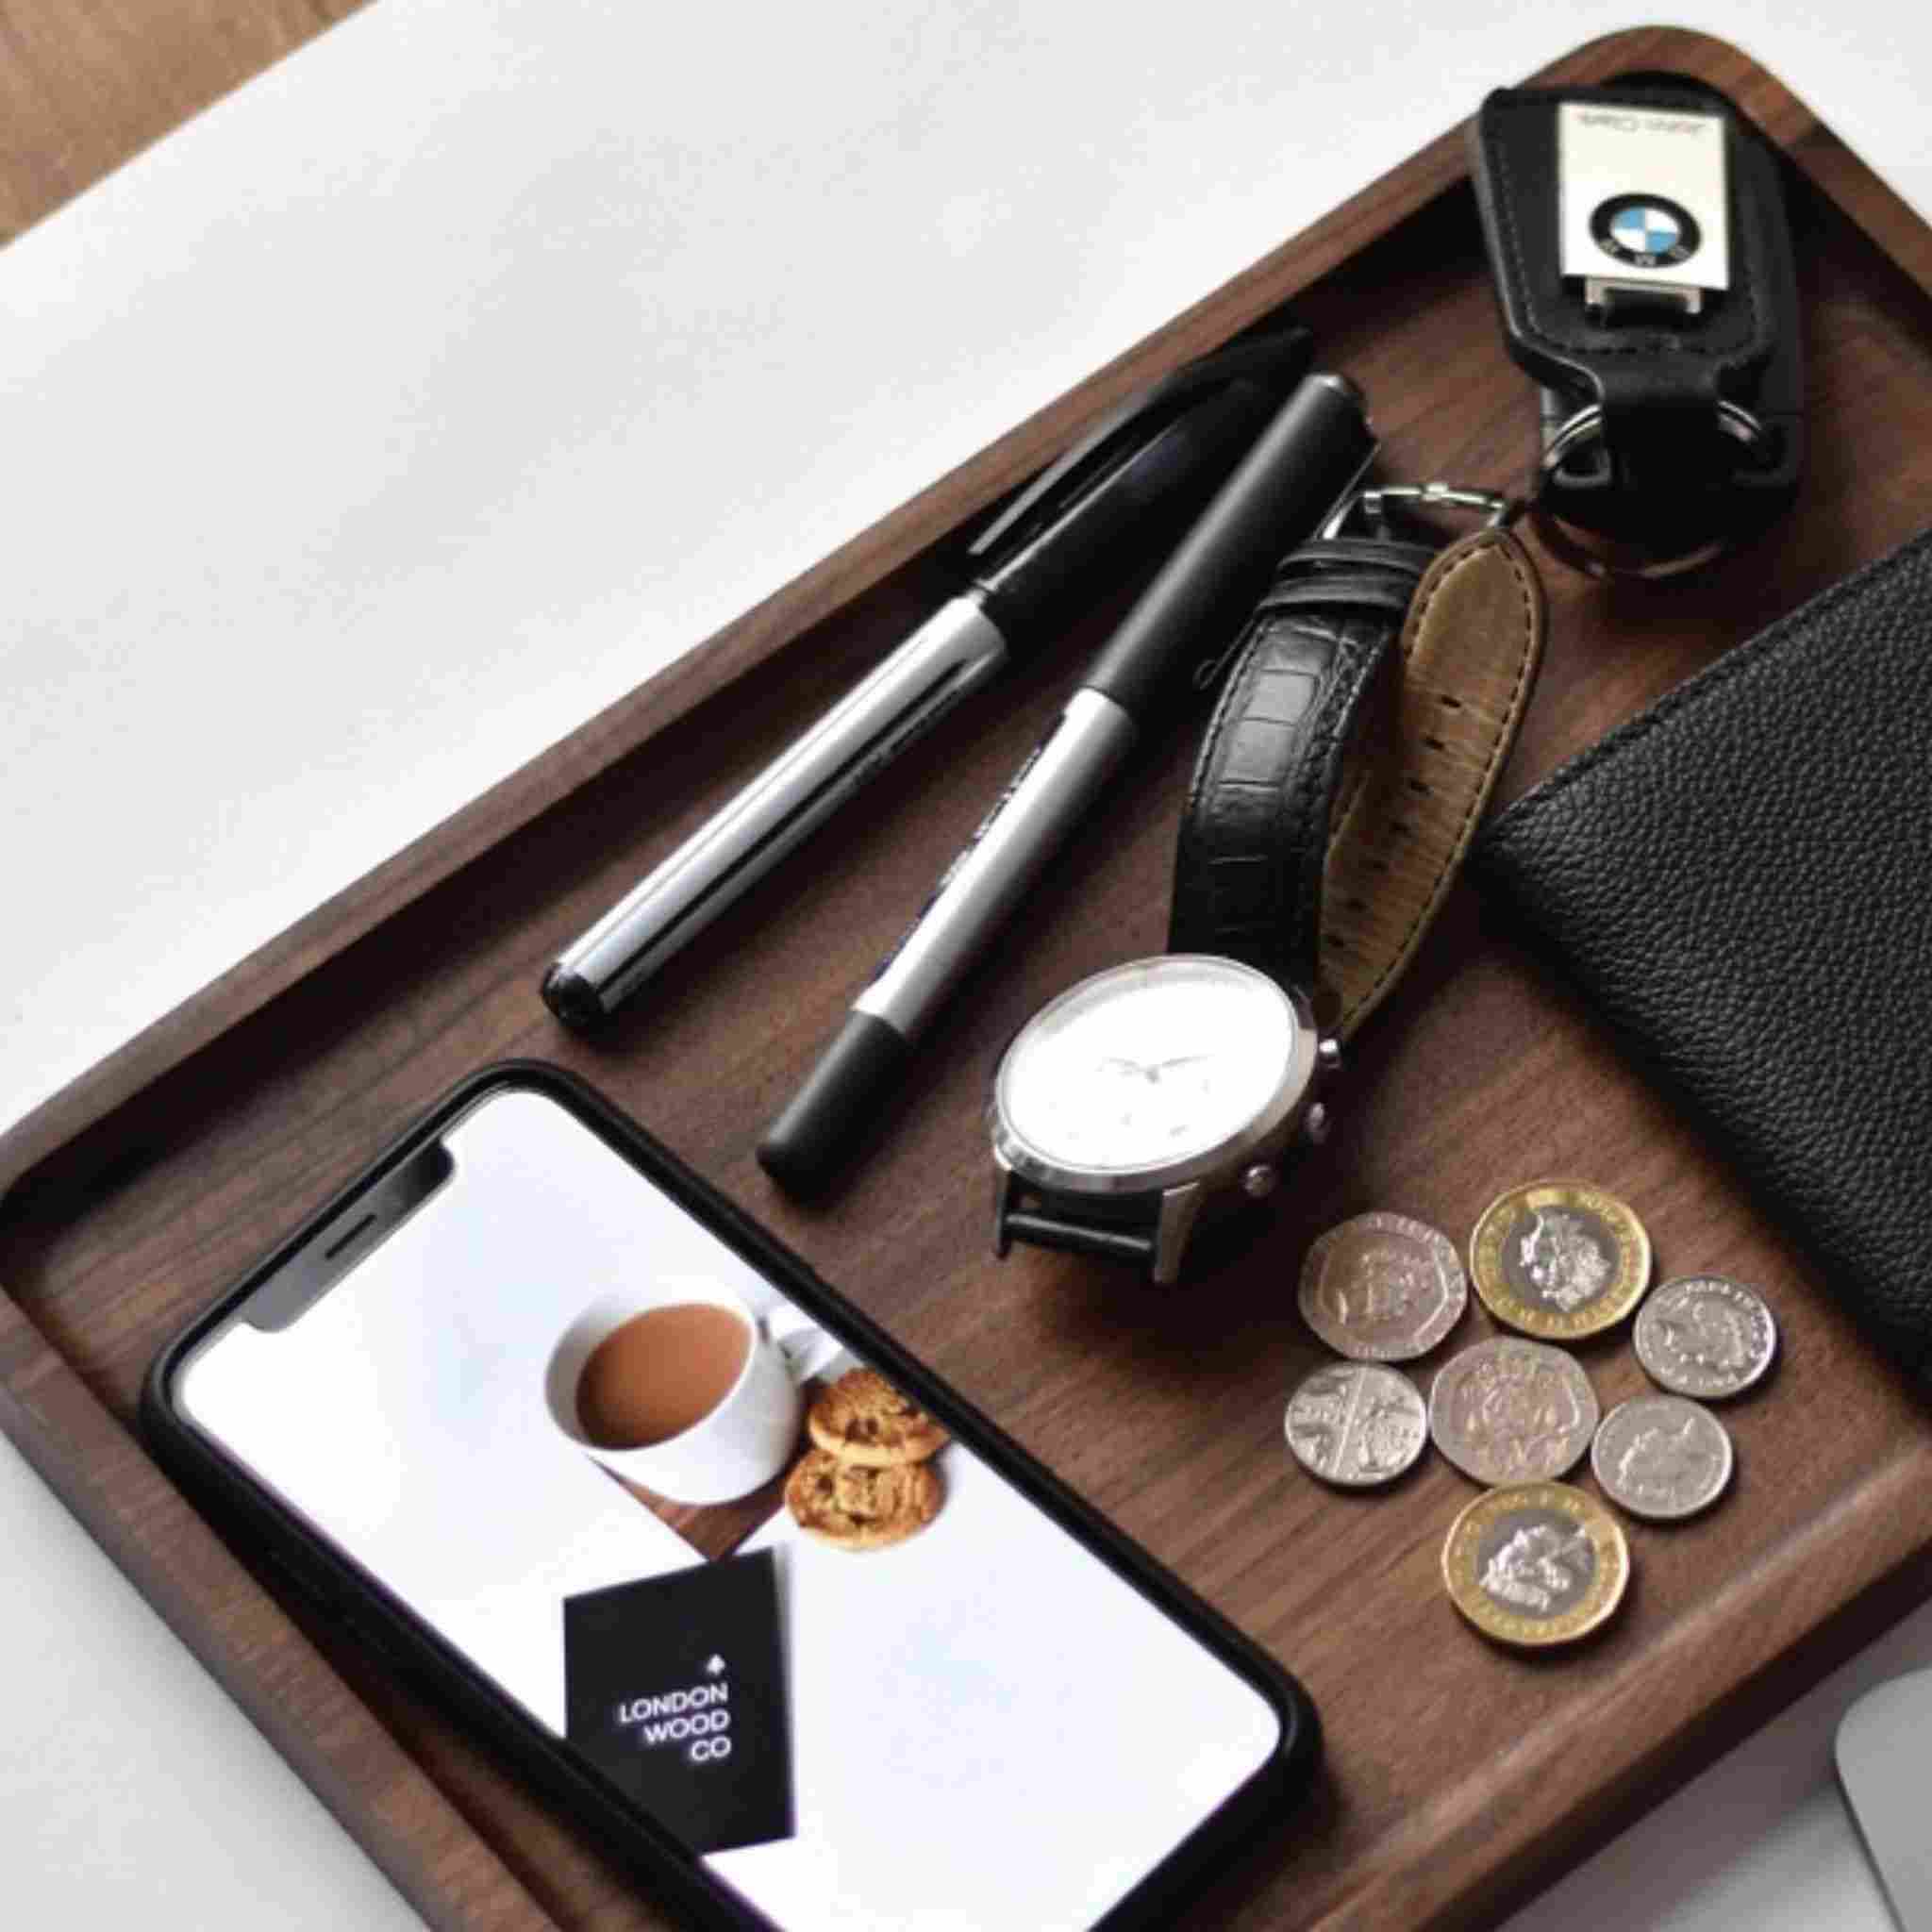 Leather goods and assocated accessories on a tray